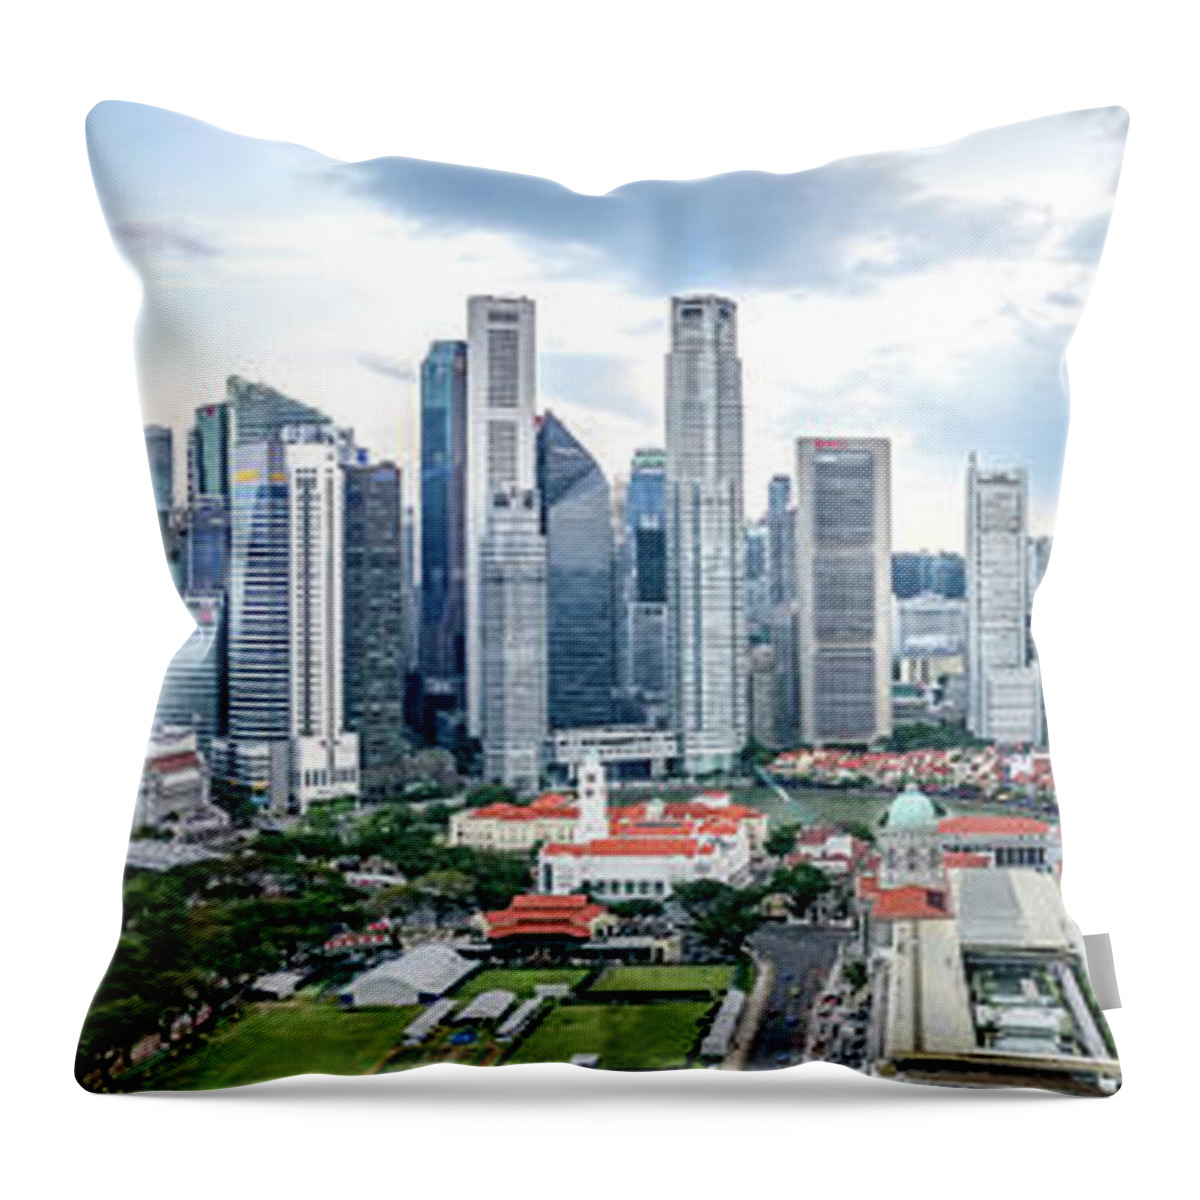 Singapore Throw Pillow featuring the photograph Singapore Cityscape by Chris Cousins